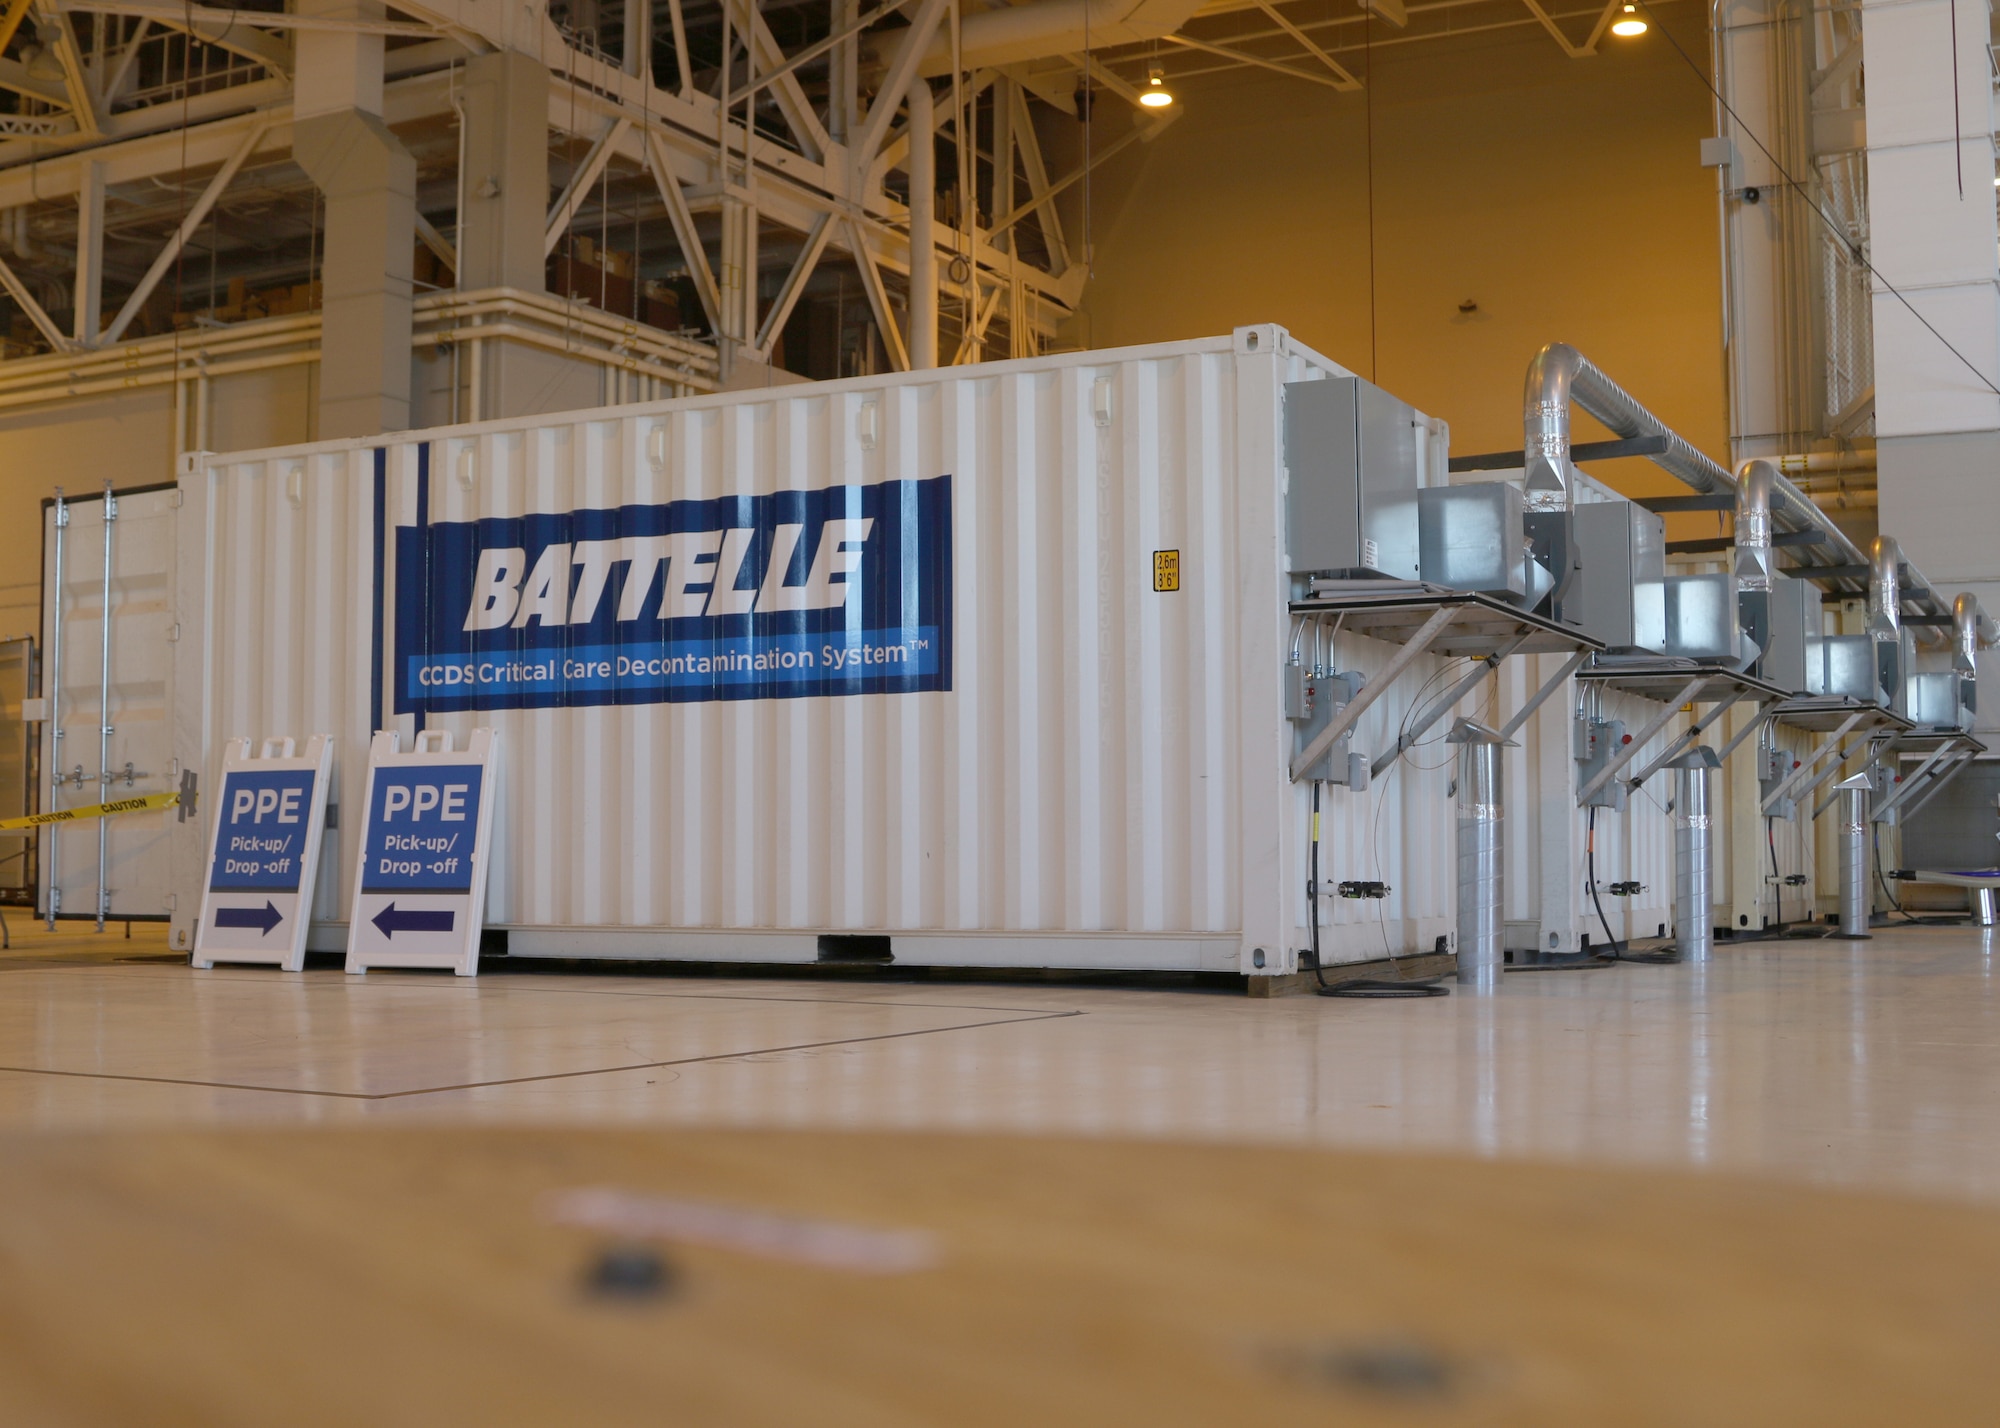 FEMA deployed a Battelle Critical Care Decontamination System™ to Kansas to assist state and local health care officials with mask shortages. The system can decontaminate thousands of N95 respirators using concentrated, vapor phase hydrogen peroxide.